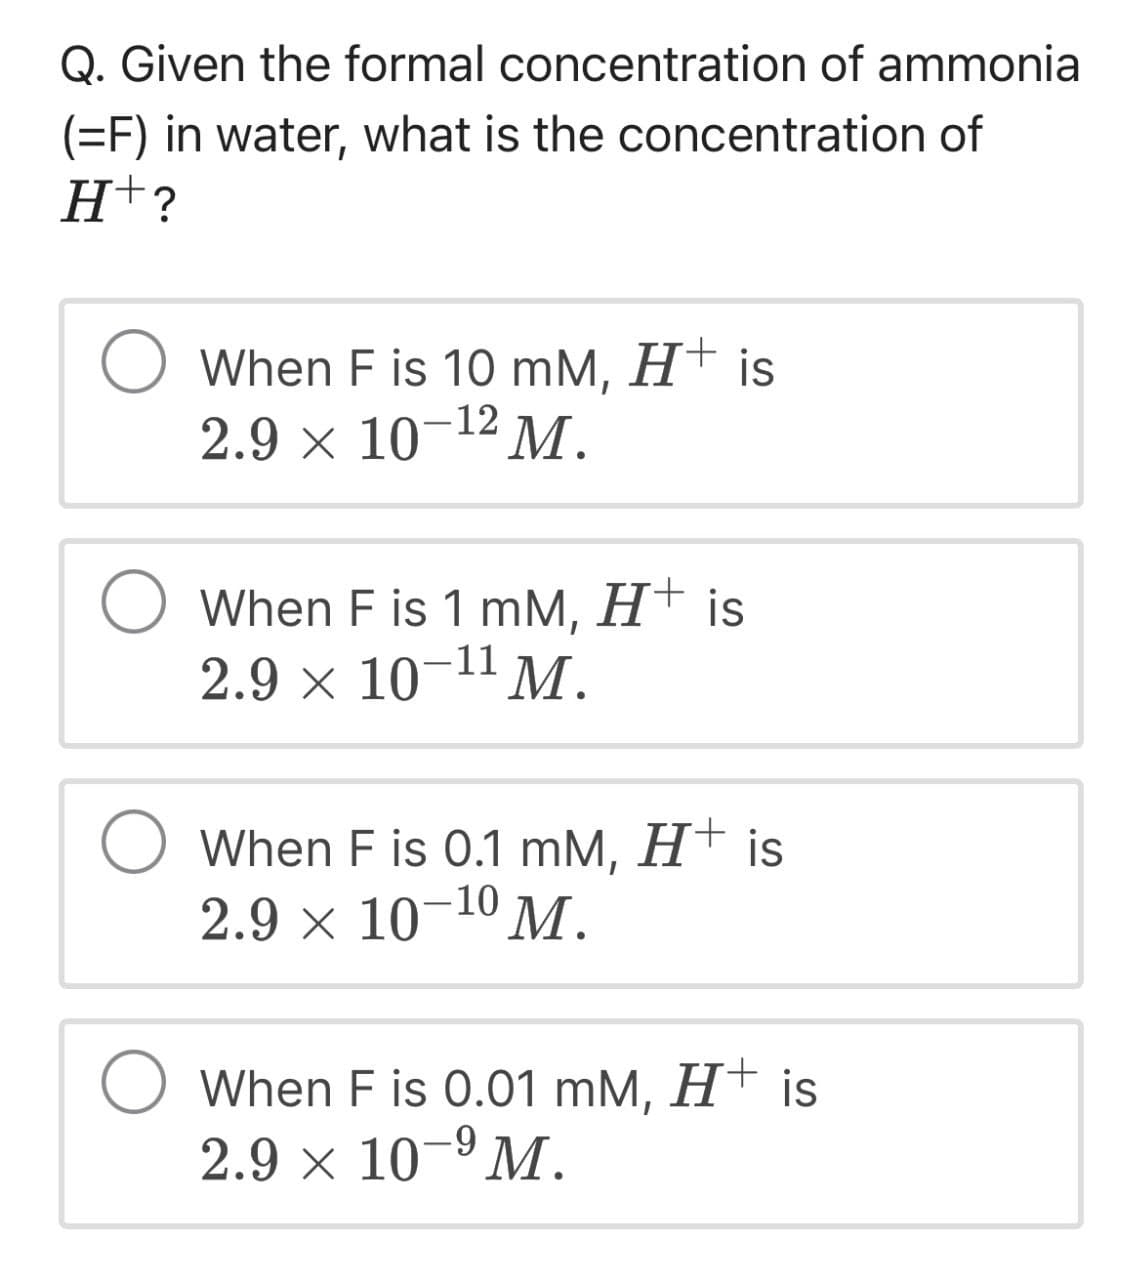 Q. Given the formal concentration of ammonia
(=F) in water, what is the concentration of
H+?
When F is 10 mM, H+ is
2.9 × 10¯¹² M.
-12
When F is 1 mM, H+ is
2.9 × 10-11 M.
When F is 0.1 mM, H+ is
2.9 × 10 10 M.
When F is 0.01 mM, H+ is
2.9 × 10-9 M.